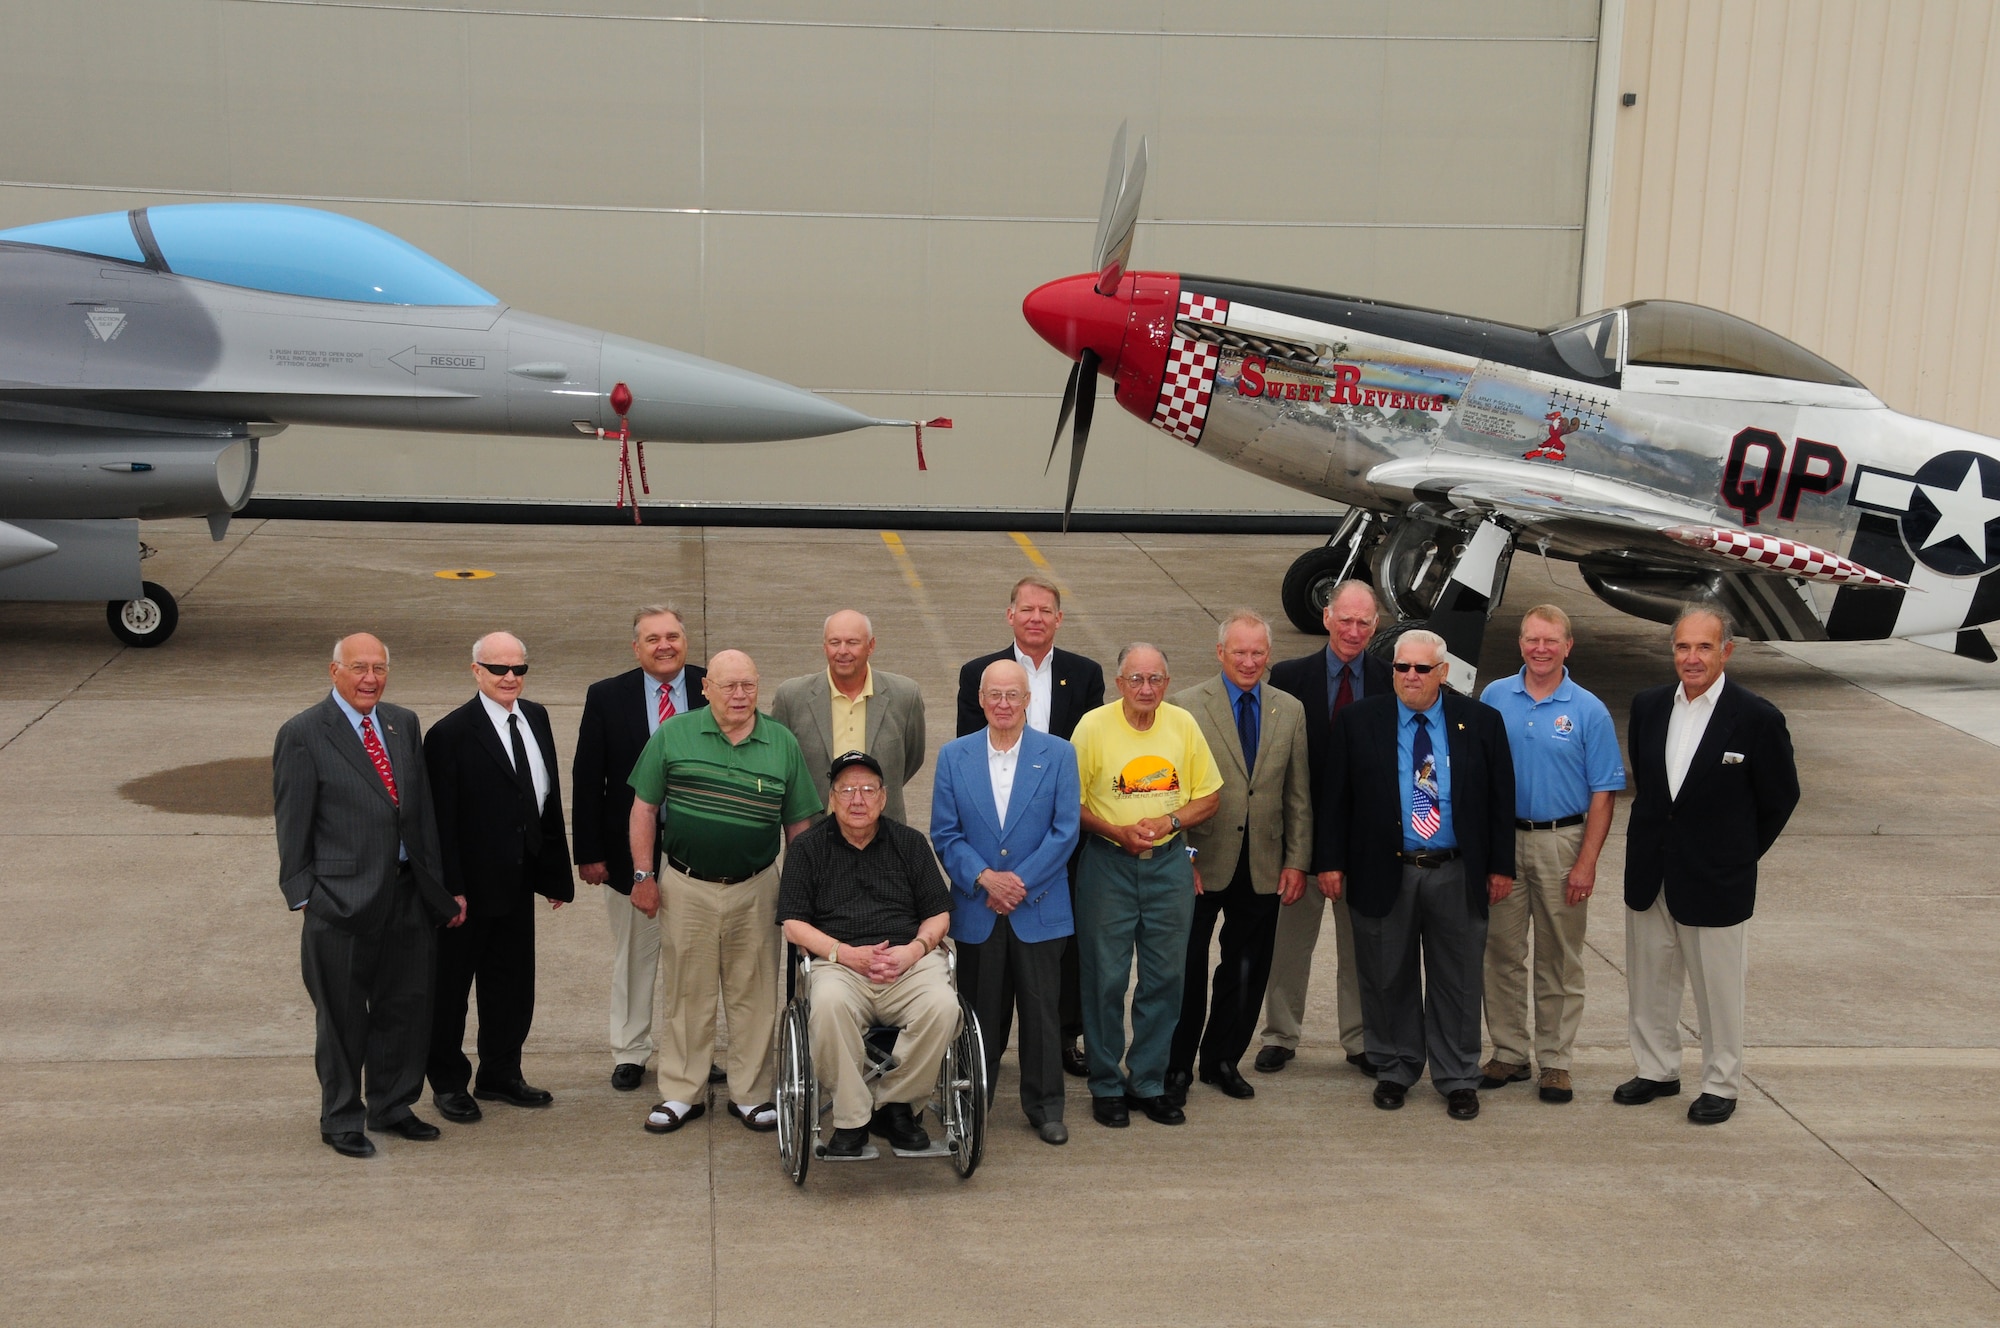 Former 148th Fighter Wing members along with other special guests pose for a group shot with the P-51 Mustang and the block 10, F-16 during the Minnesota Air National Guard's 90th Anniversary celebration. The P-51 Mustang is the original aircraft flown by the 148th Fighter Wing and was flown from 1948 to 1954.   (U.S. Air Force photo by Master Sgt. Ralph Kapustka/released)